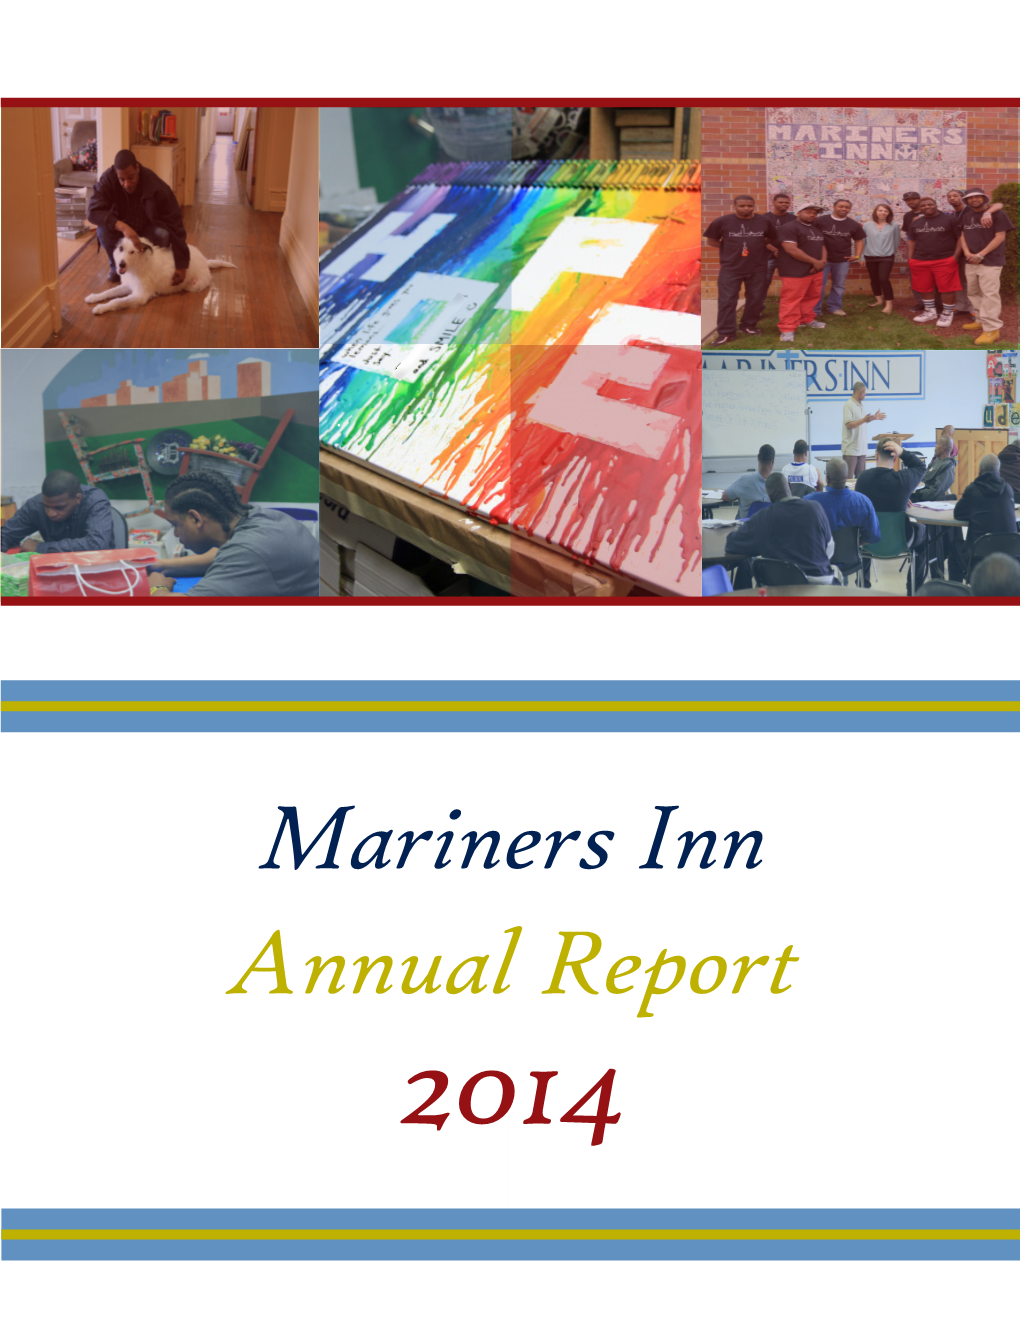 Annual Report Mariners